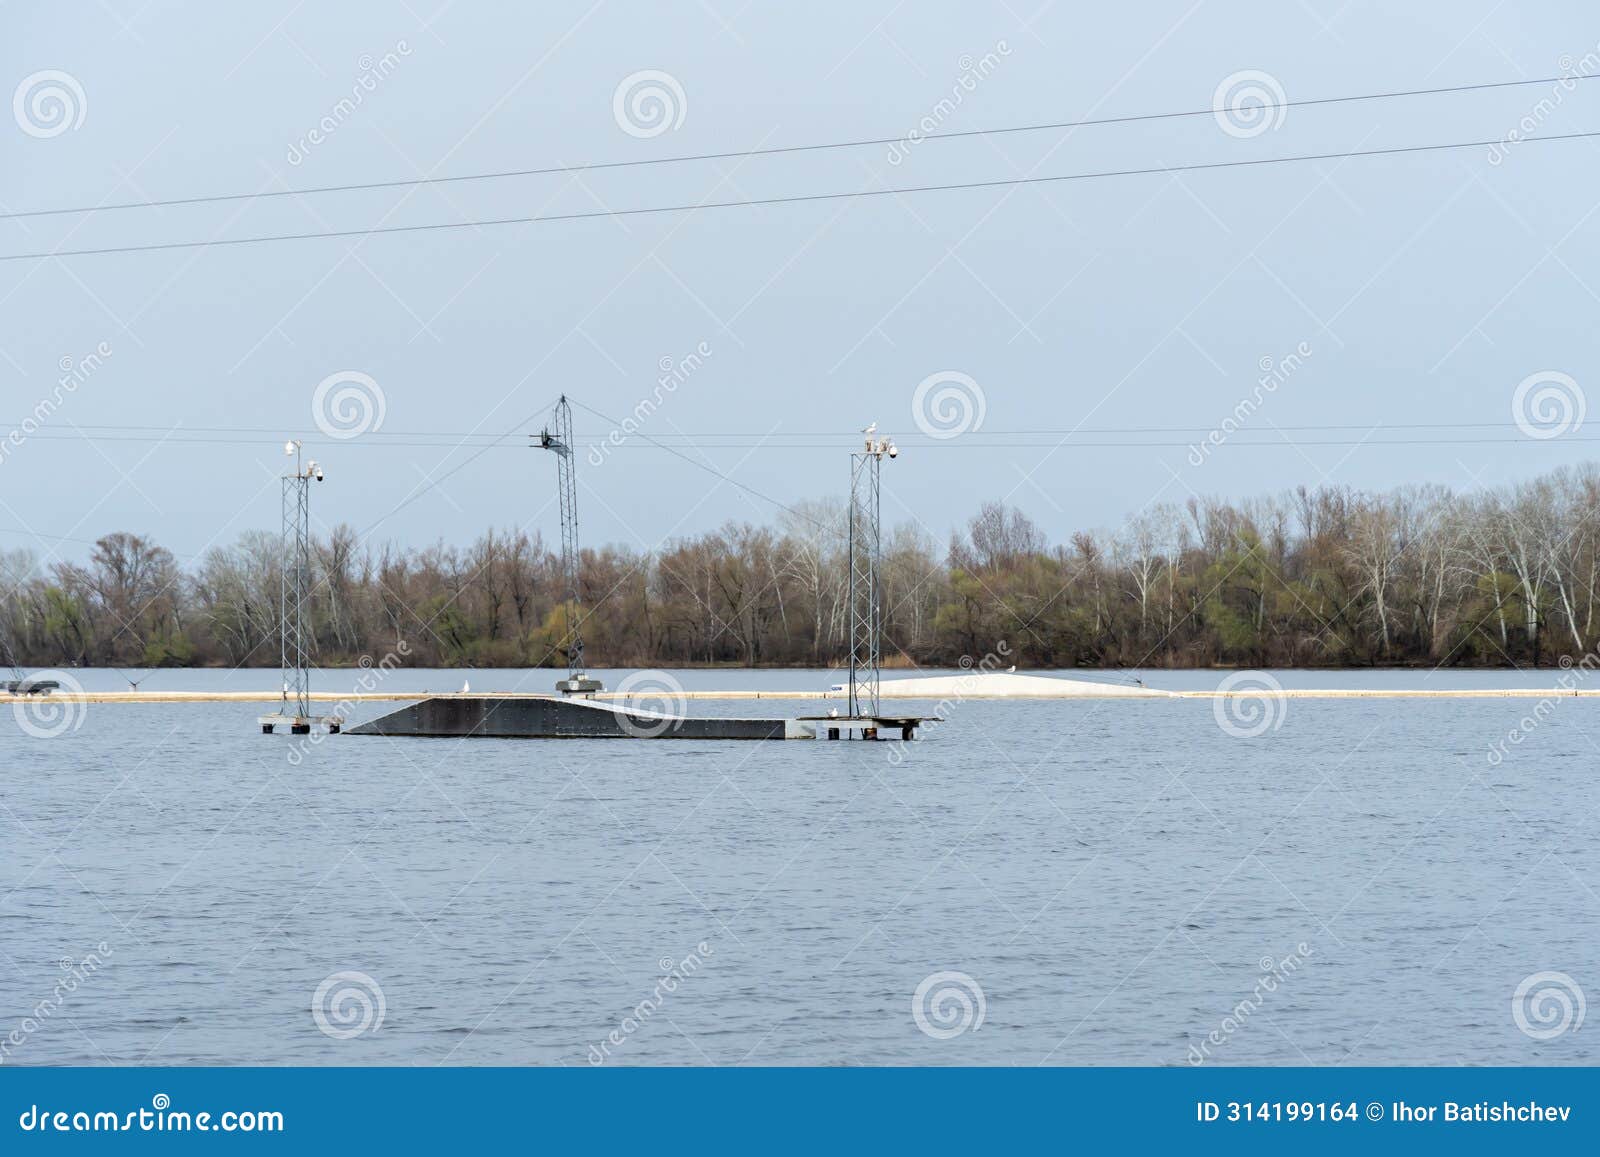 wake cable park for wakeboarding on river. pulley system reverse equipment wakeboard in water. traction water snowboard halyard